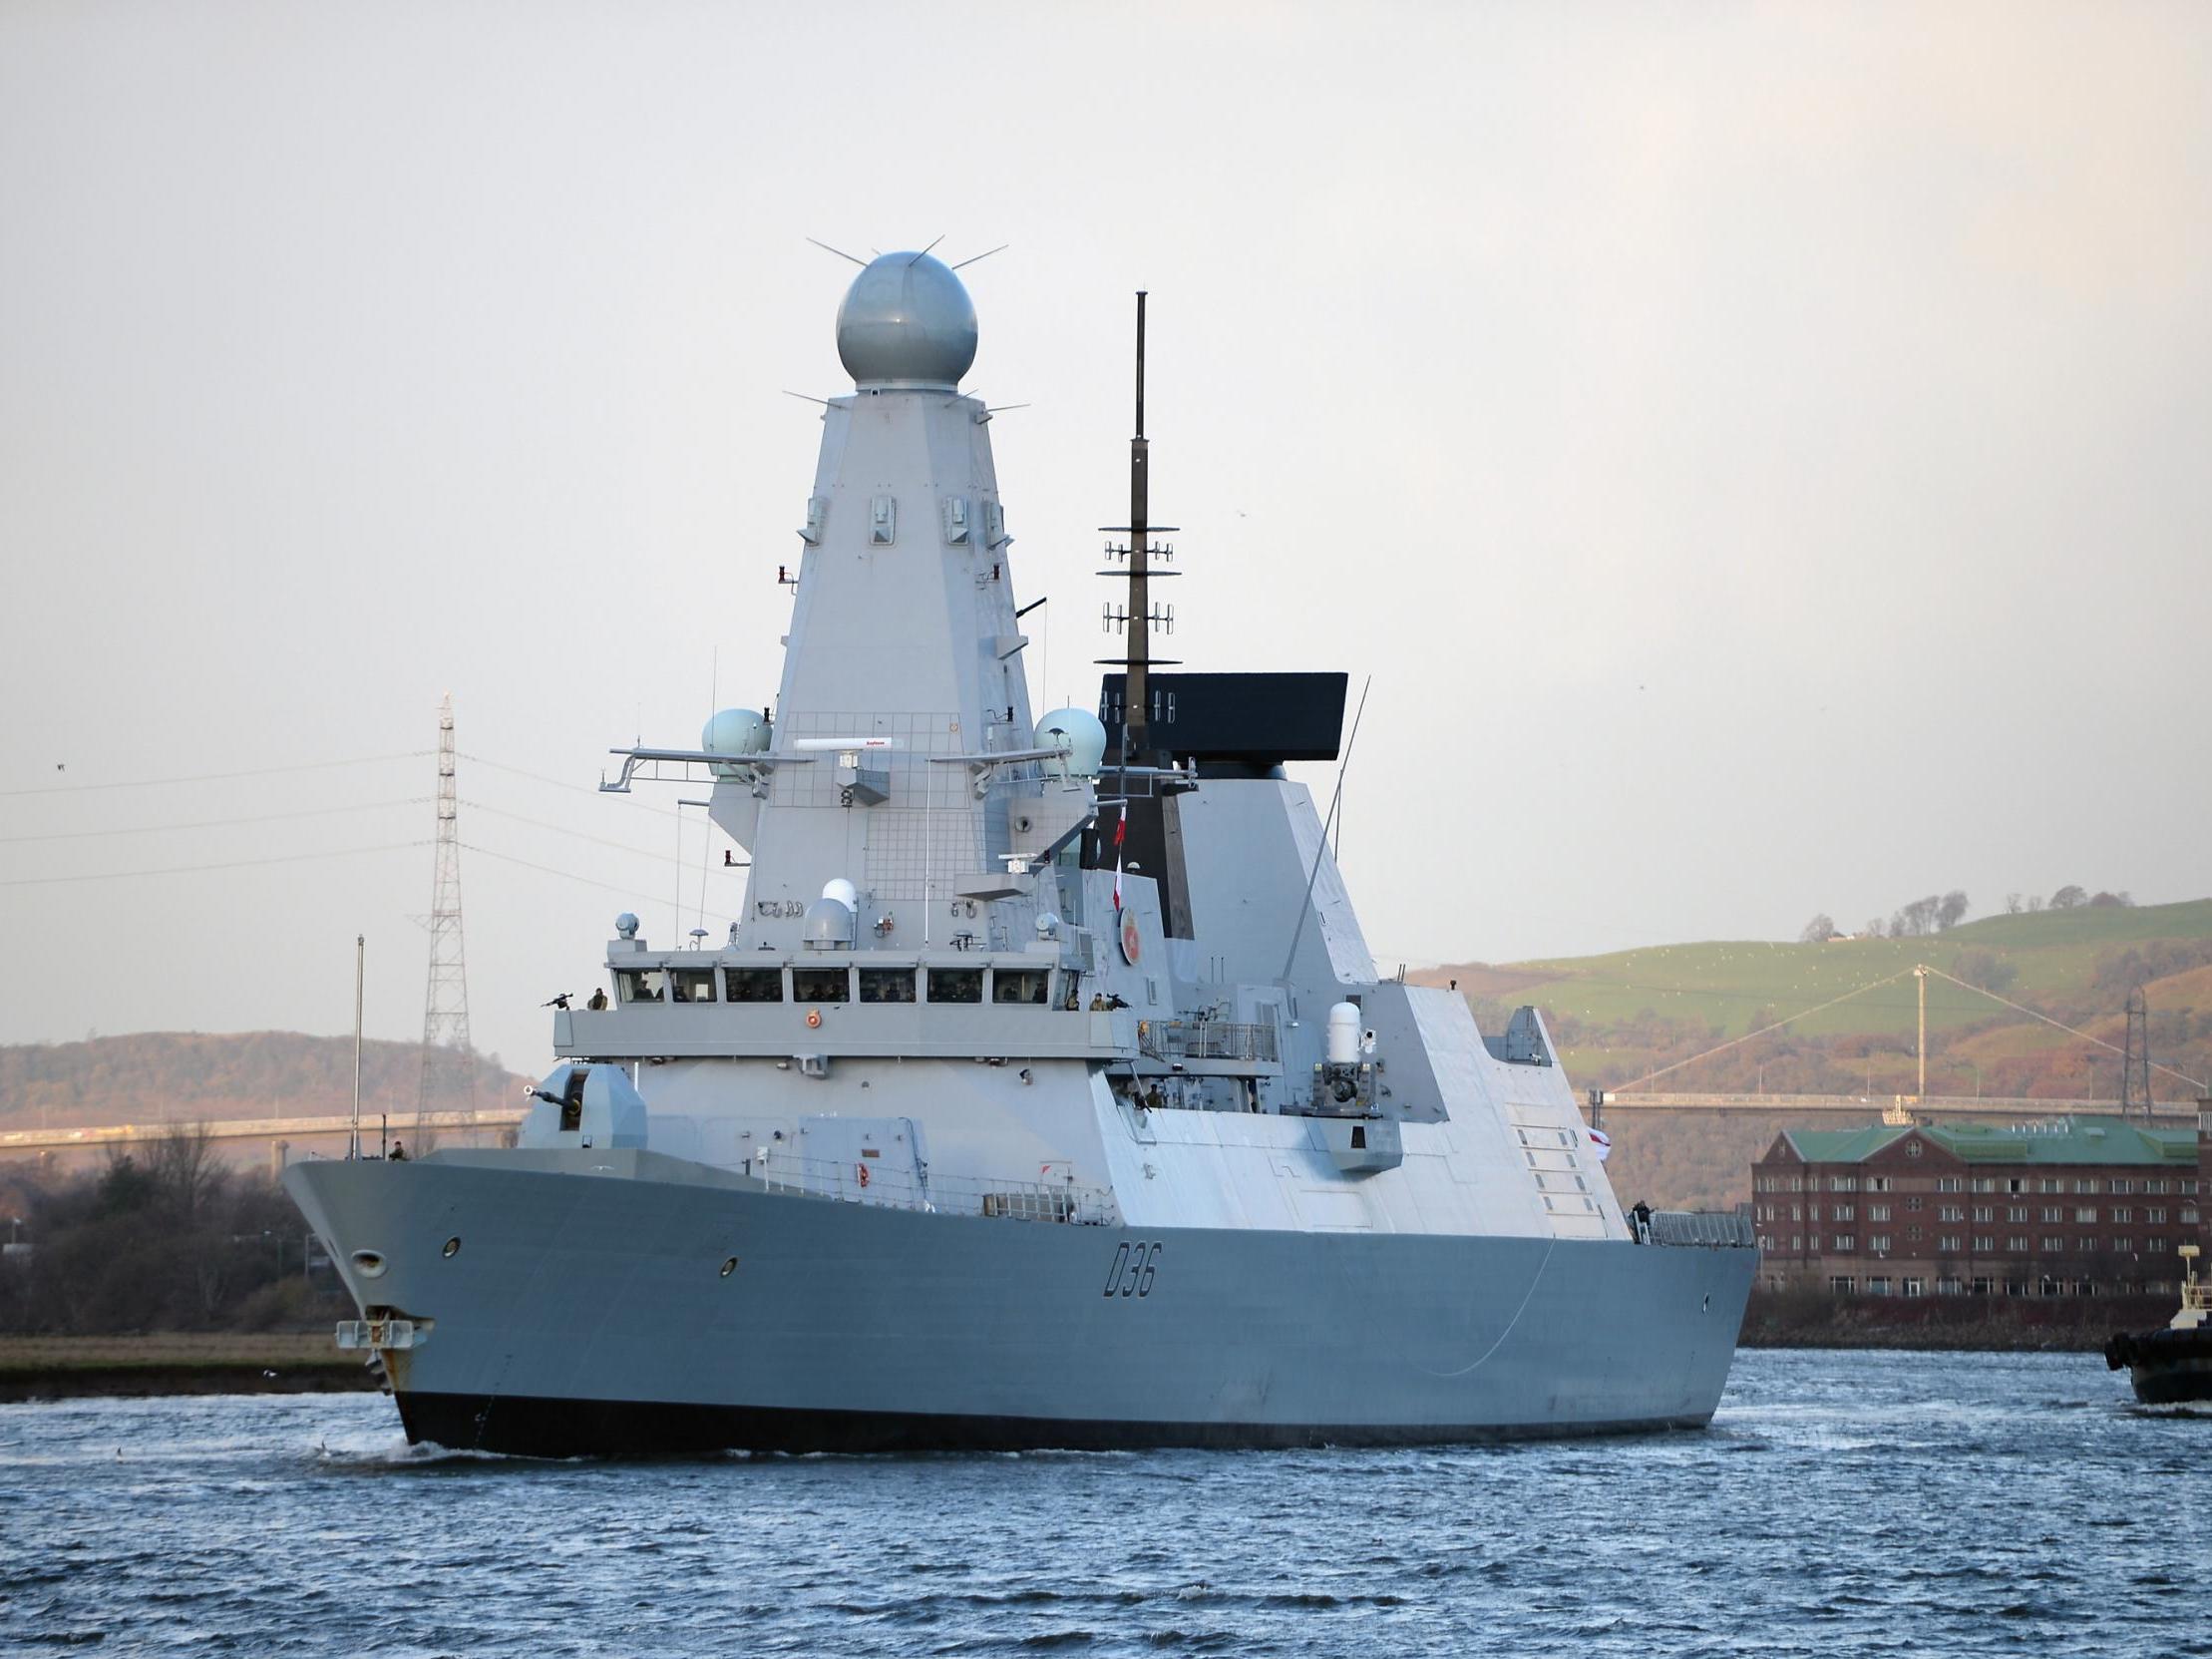 British warship HMS Defender makes its way up the River Clydeon in Glasgow, Scotland, in November 2013.